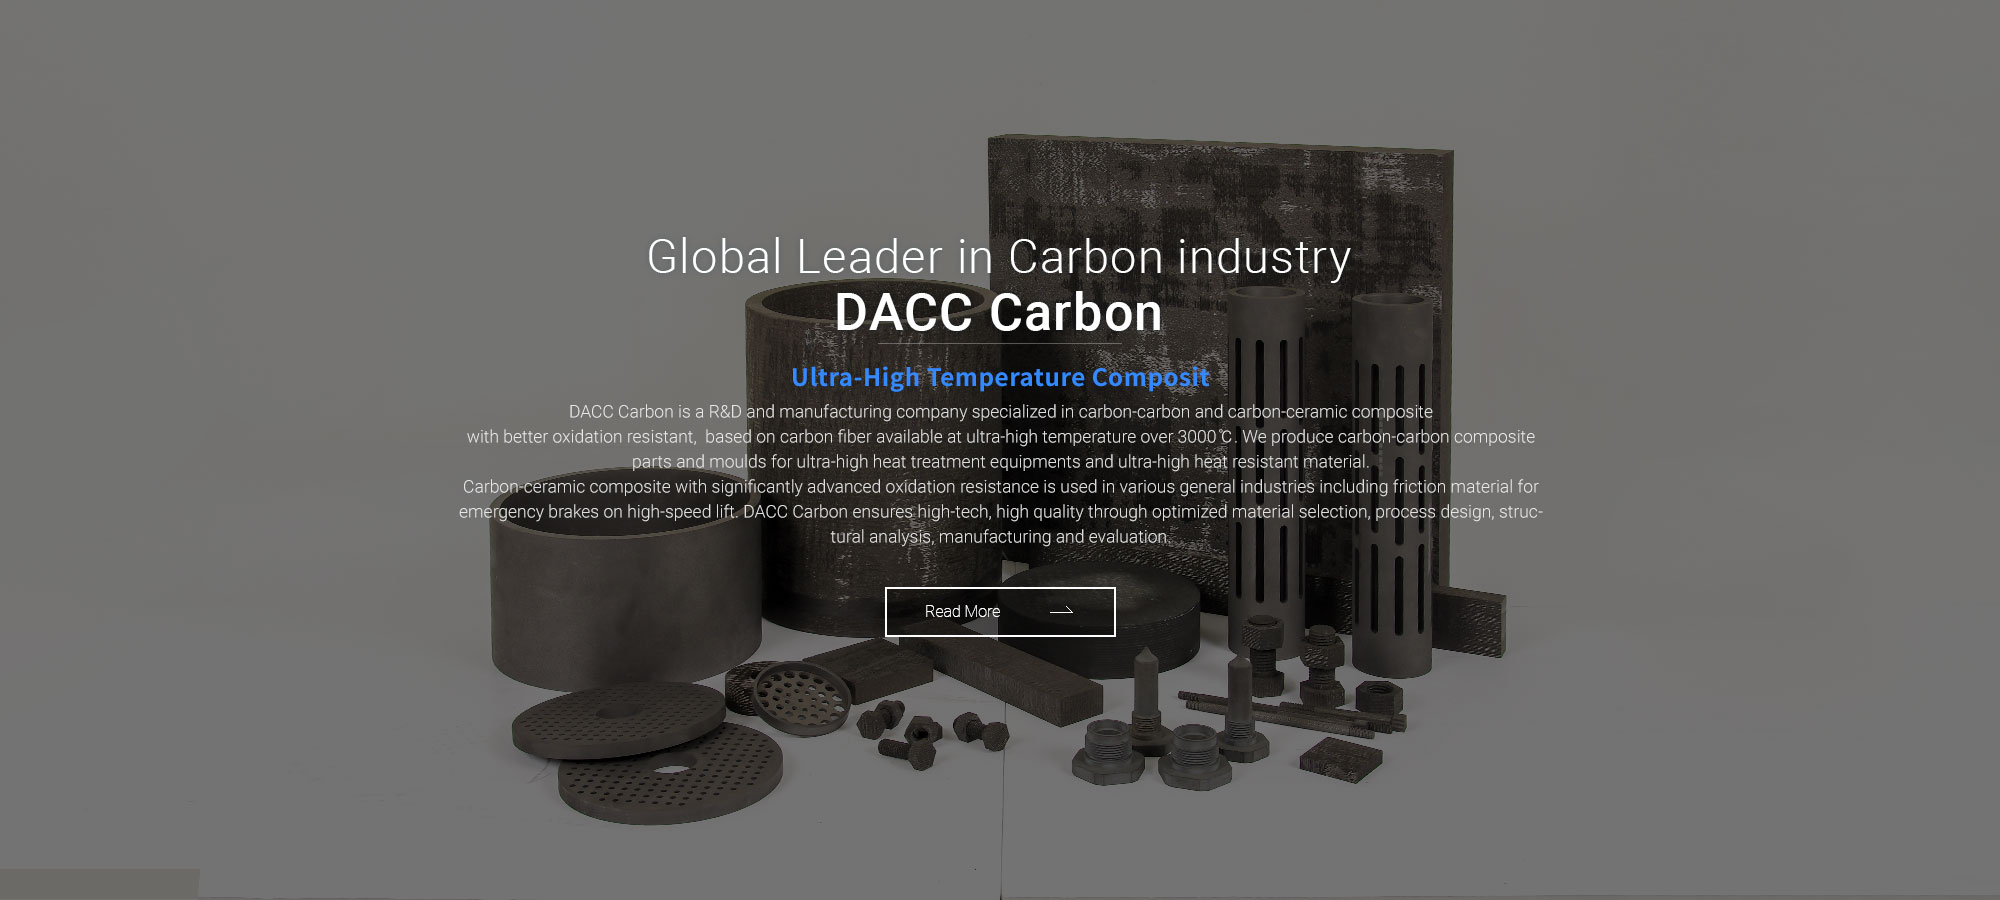 Ultra-High Temperature Composite
DACC Carbon is a R&D and manufacturing company specialized in reinforced carbon-carbon and carbon-ceramic matrix composite with better oxidation resistant,  based on carbon fiber available at ultra-high temperature over 3